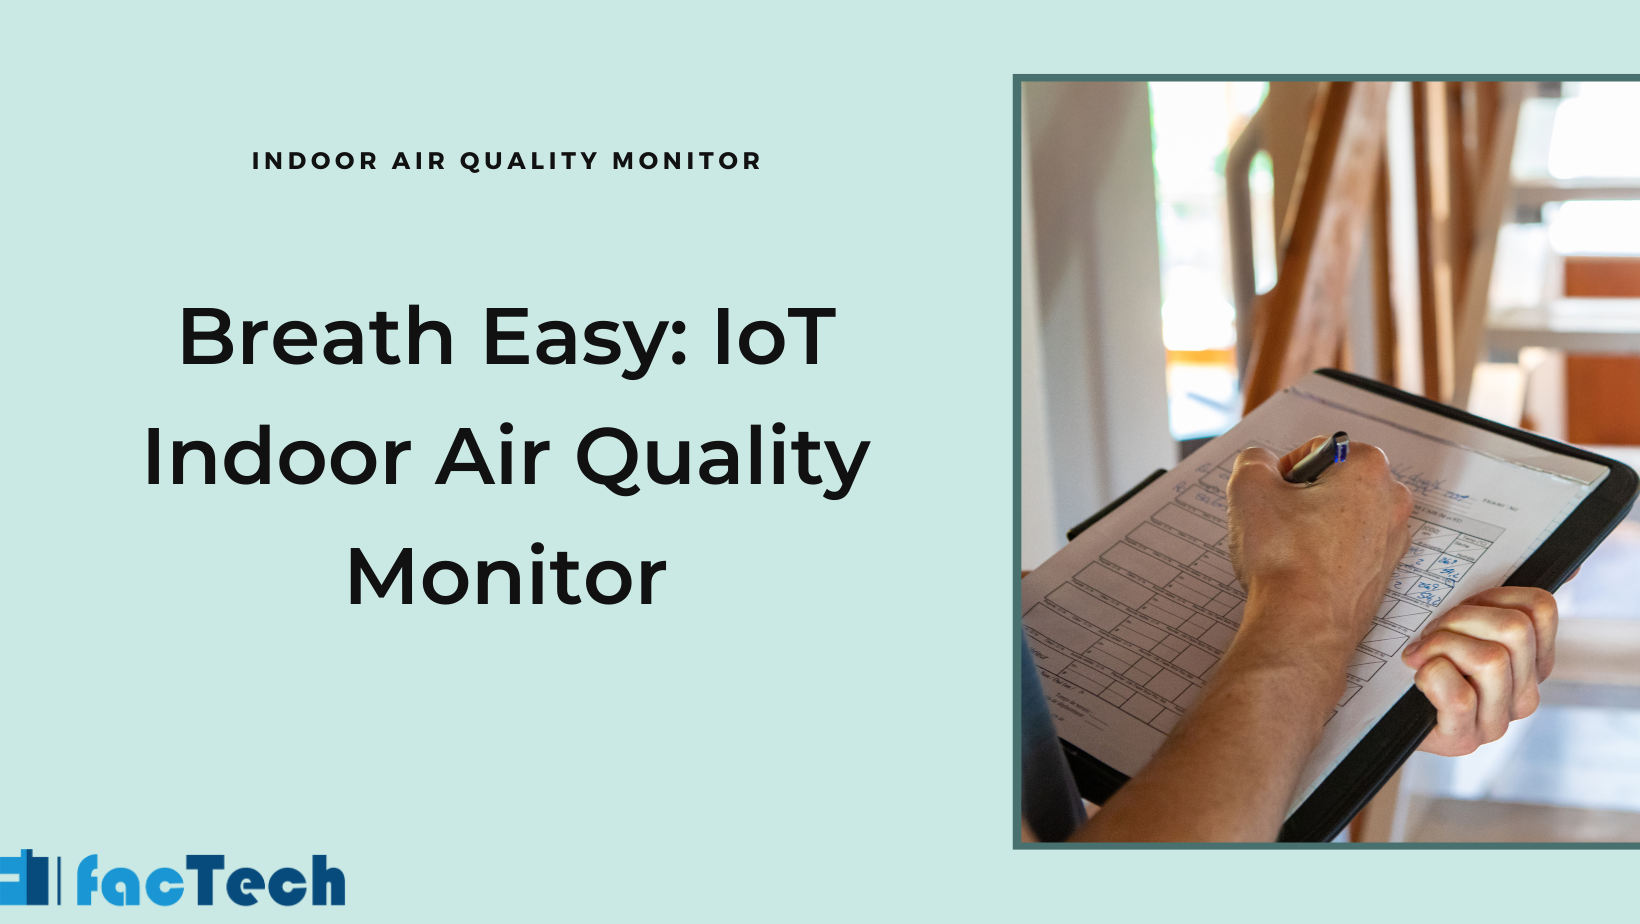 IoT indoor air quality monitor